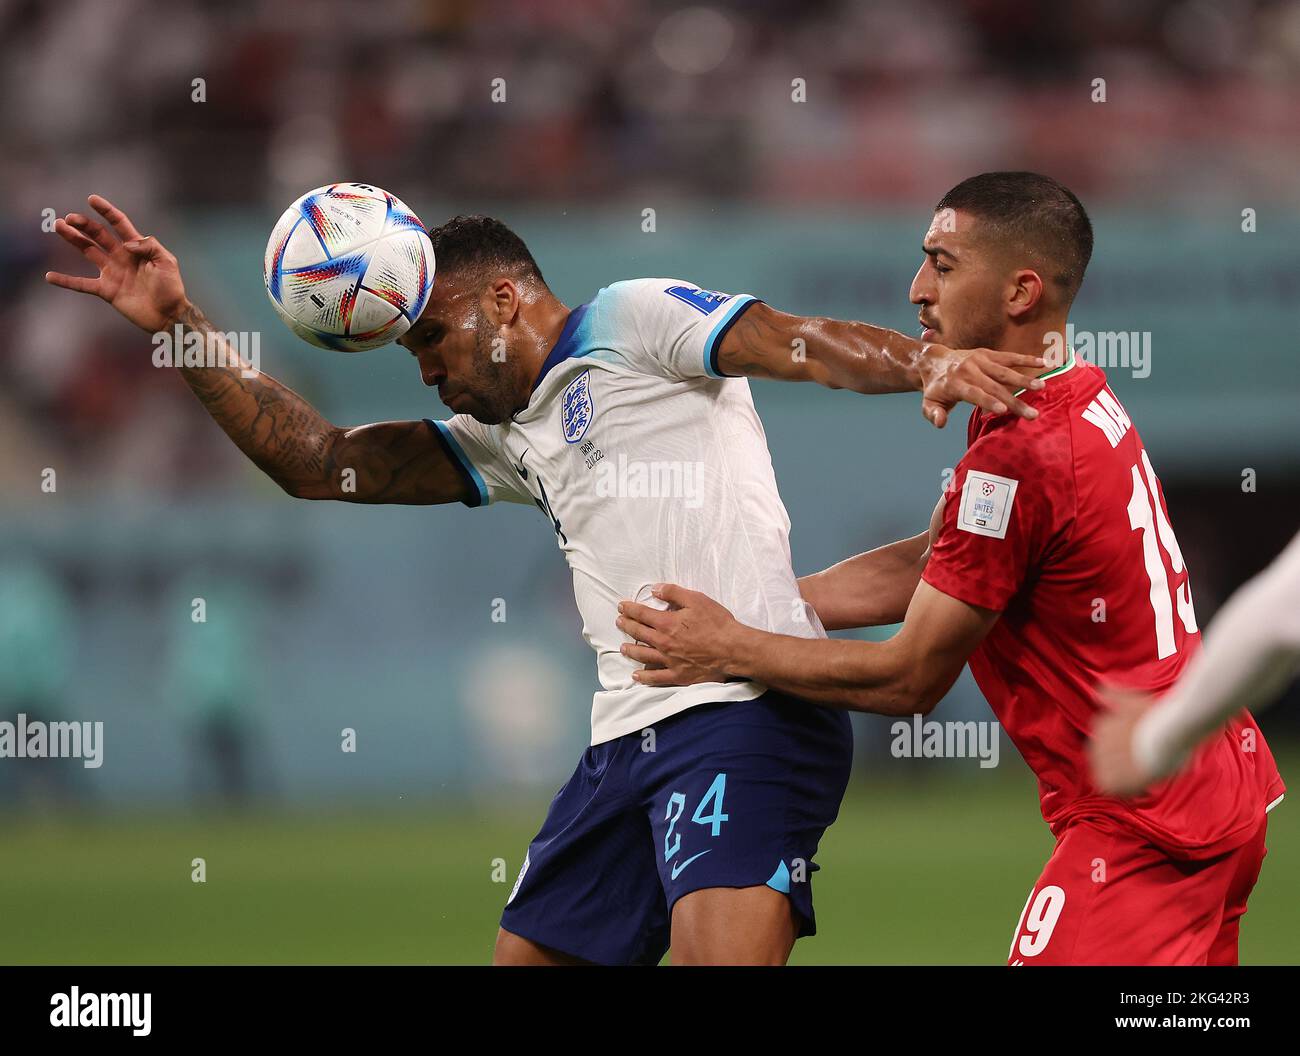 Doha, Catar. 21st Nov, 2022. WILSON Callum of England and HOSSEINI Majid of Iran during a match between England and Iran, valid for the group stage of the World Cup, held at Khalifa International Stadium in Doha, Qatar. Credit: Rodolfo Buhrer/La Imagem/FotoArena/Alamy Live News Stock Photo